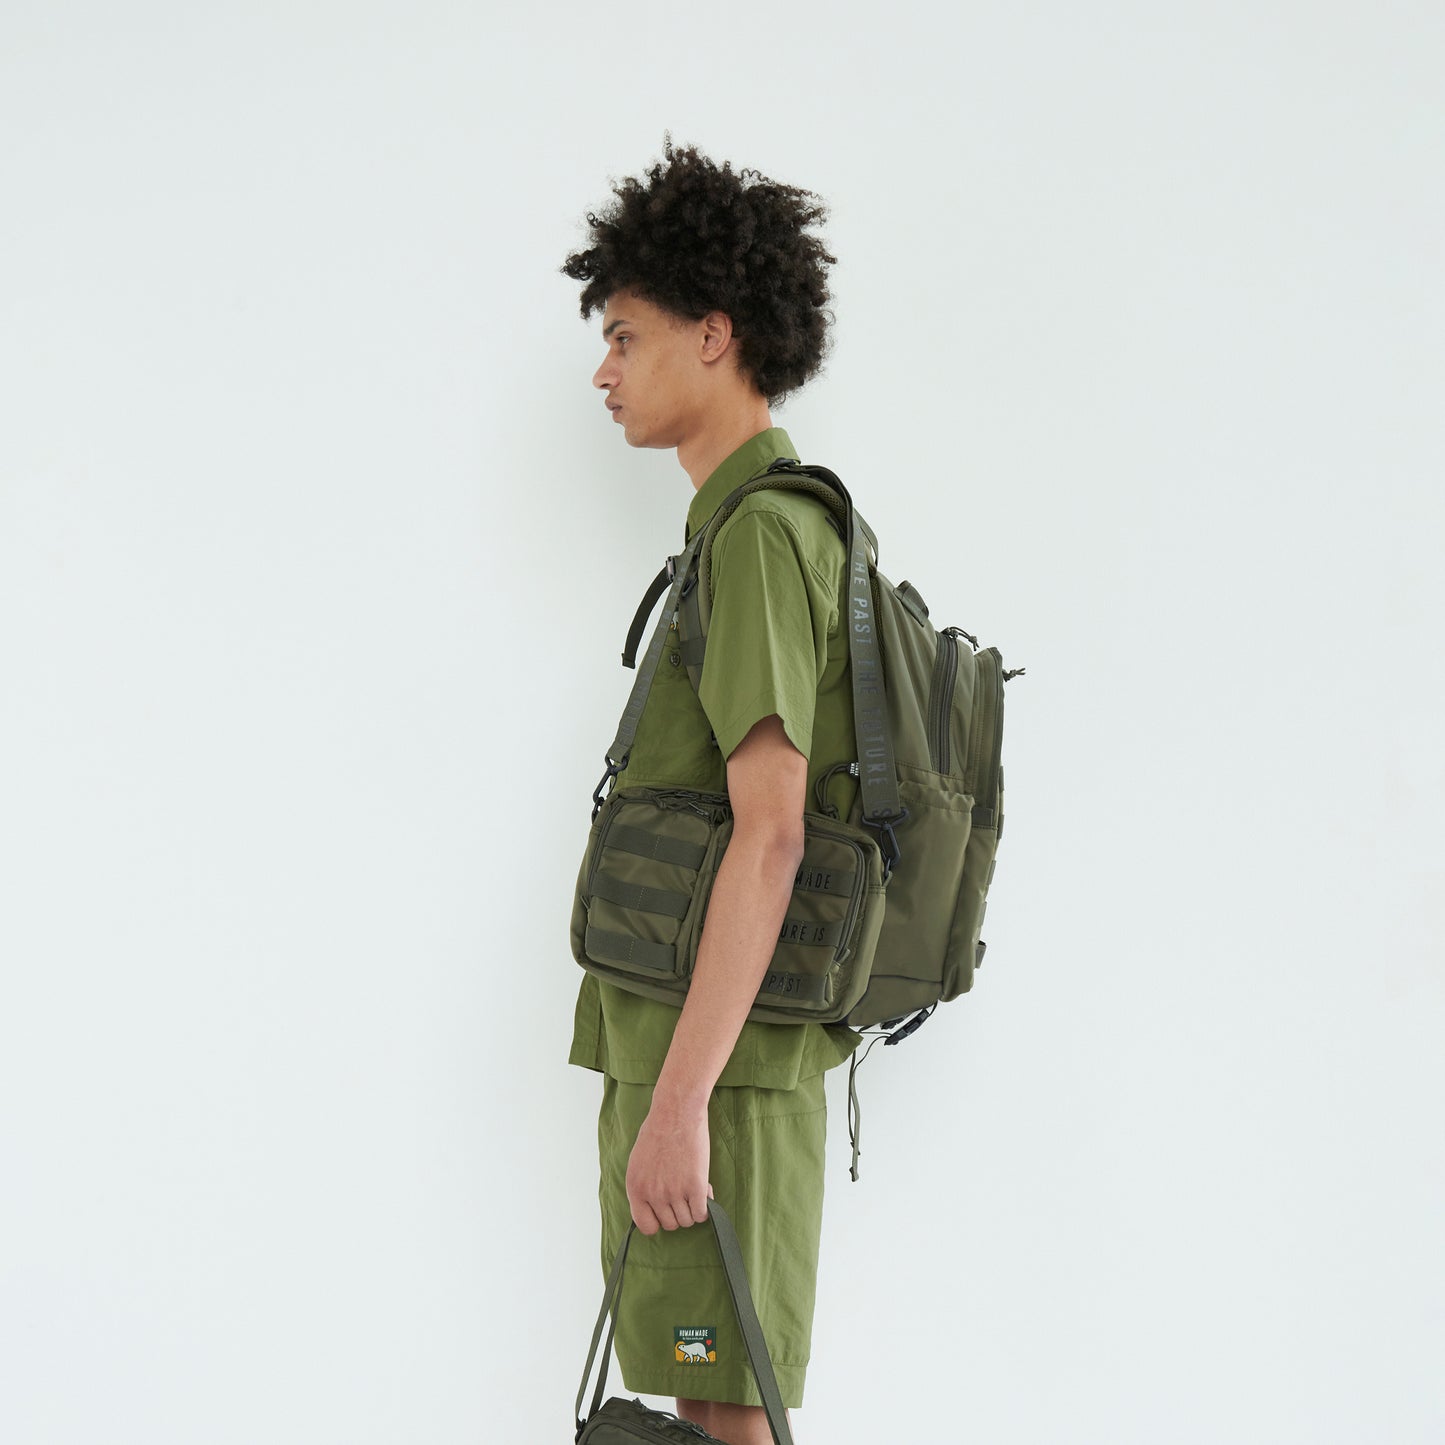 MILITARY BACKPACK – HUMAN MADE ONLINE STORE